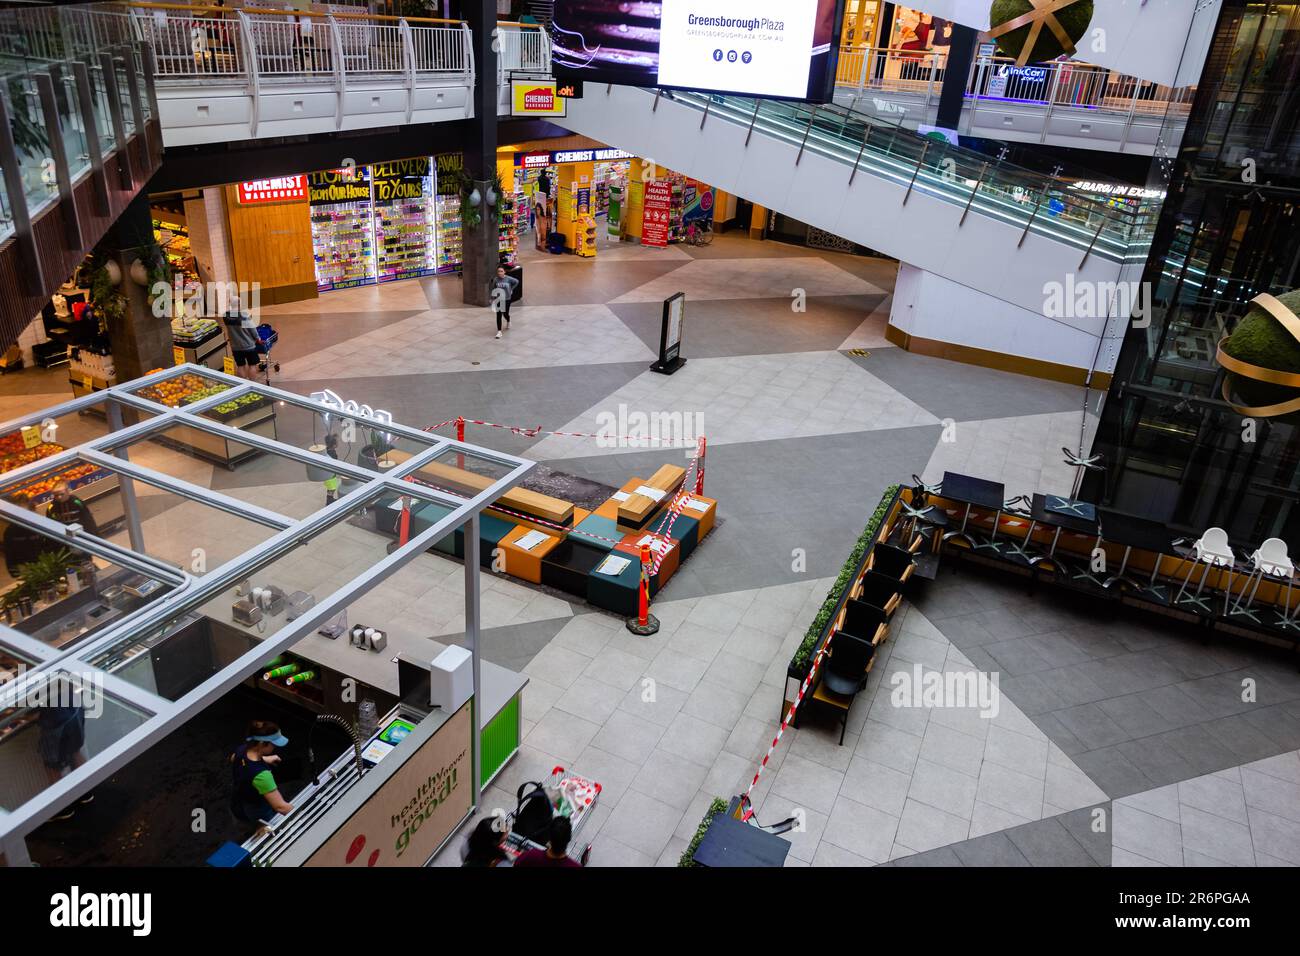 MELBOURNE, AUSTRALIA - APRIL 29: The Greensborough Plaza remains largely empty during COVID 19 on 29 April, 2020 in Melbourne, Australia. Stock Photo